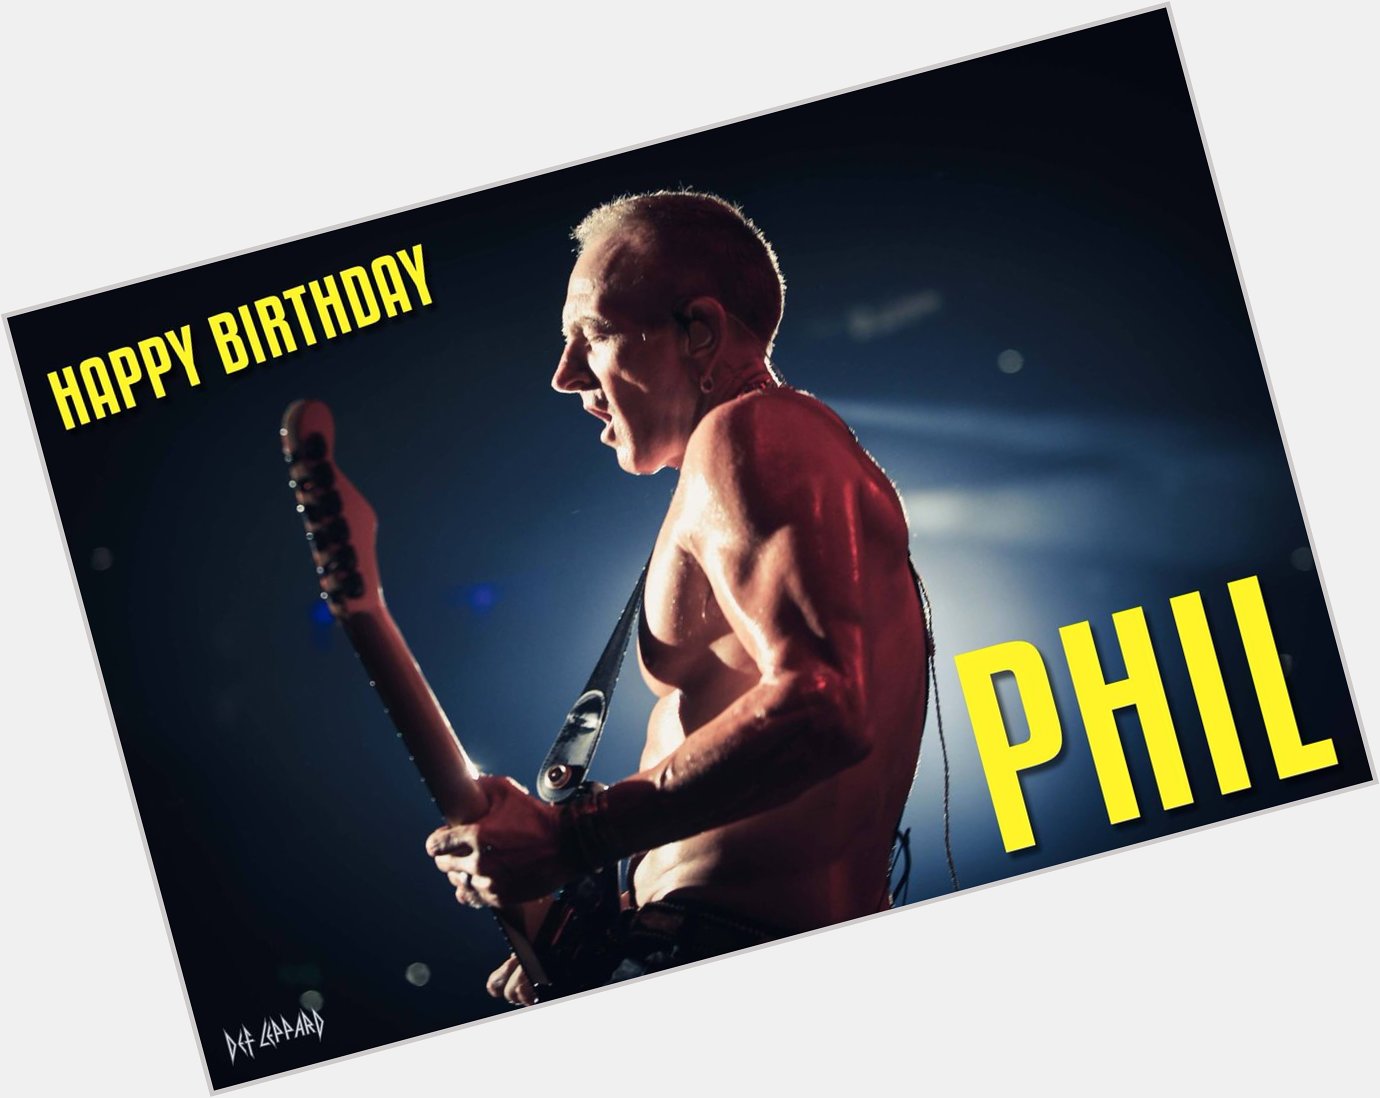 Wishing Phil Collen a very happy birthday today! 